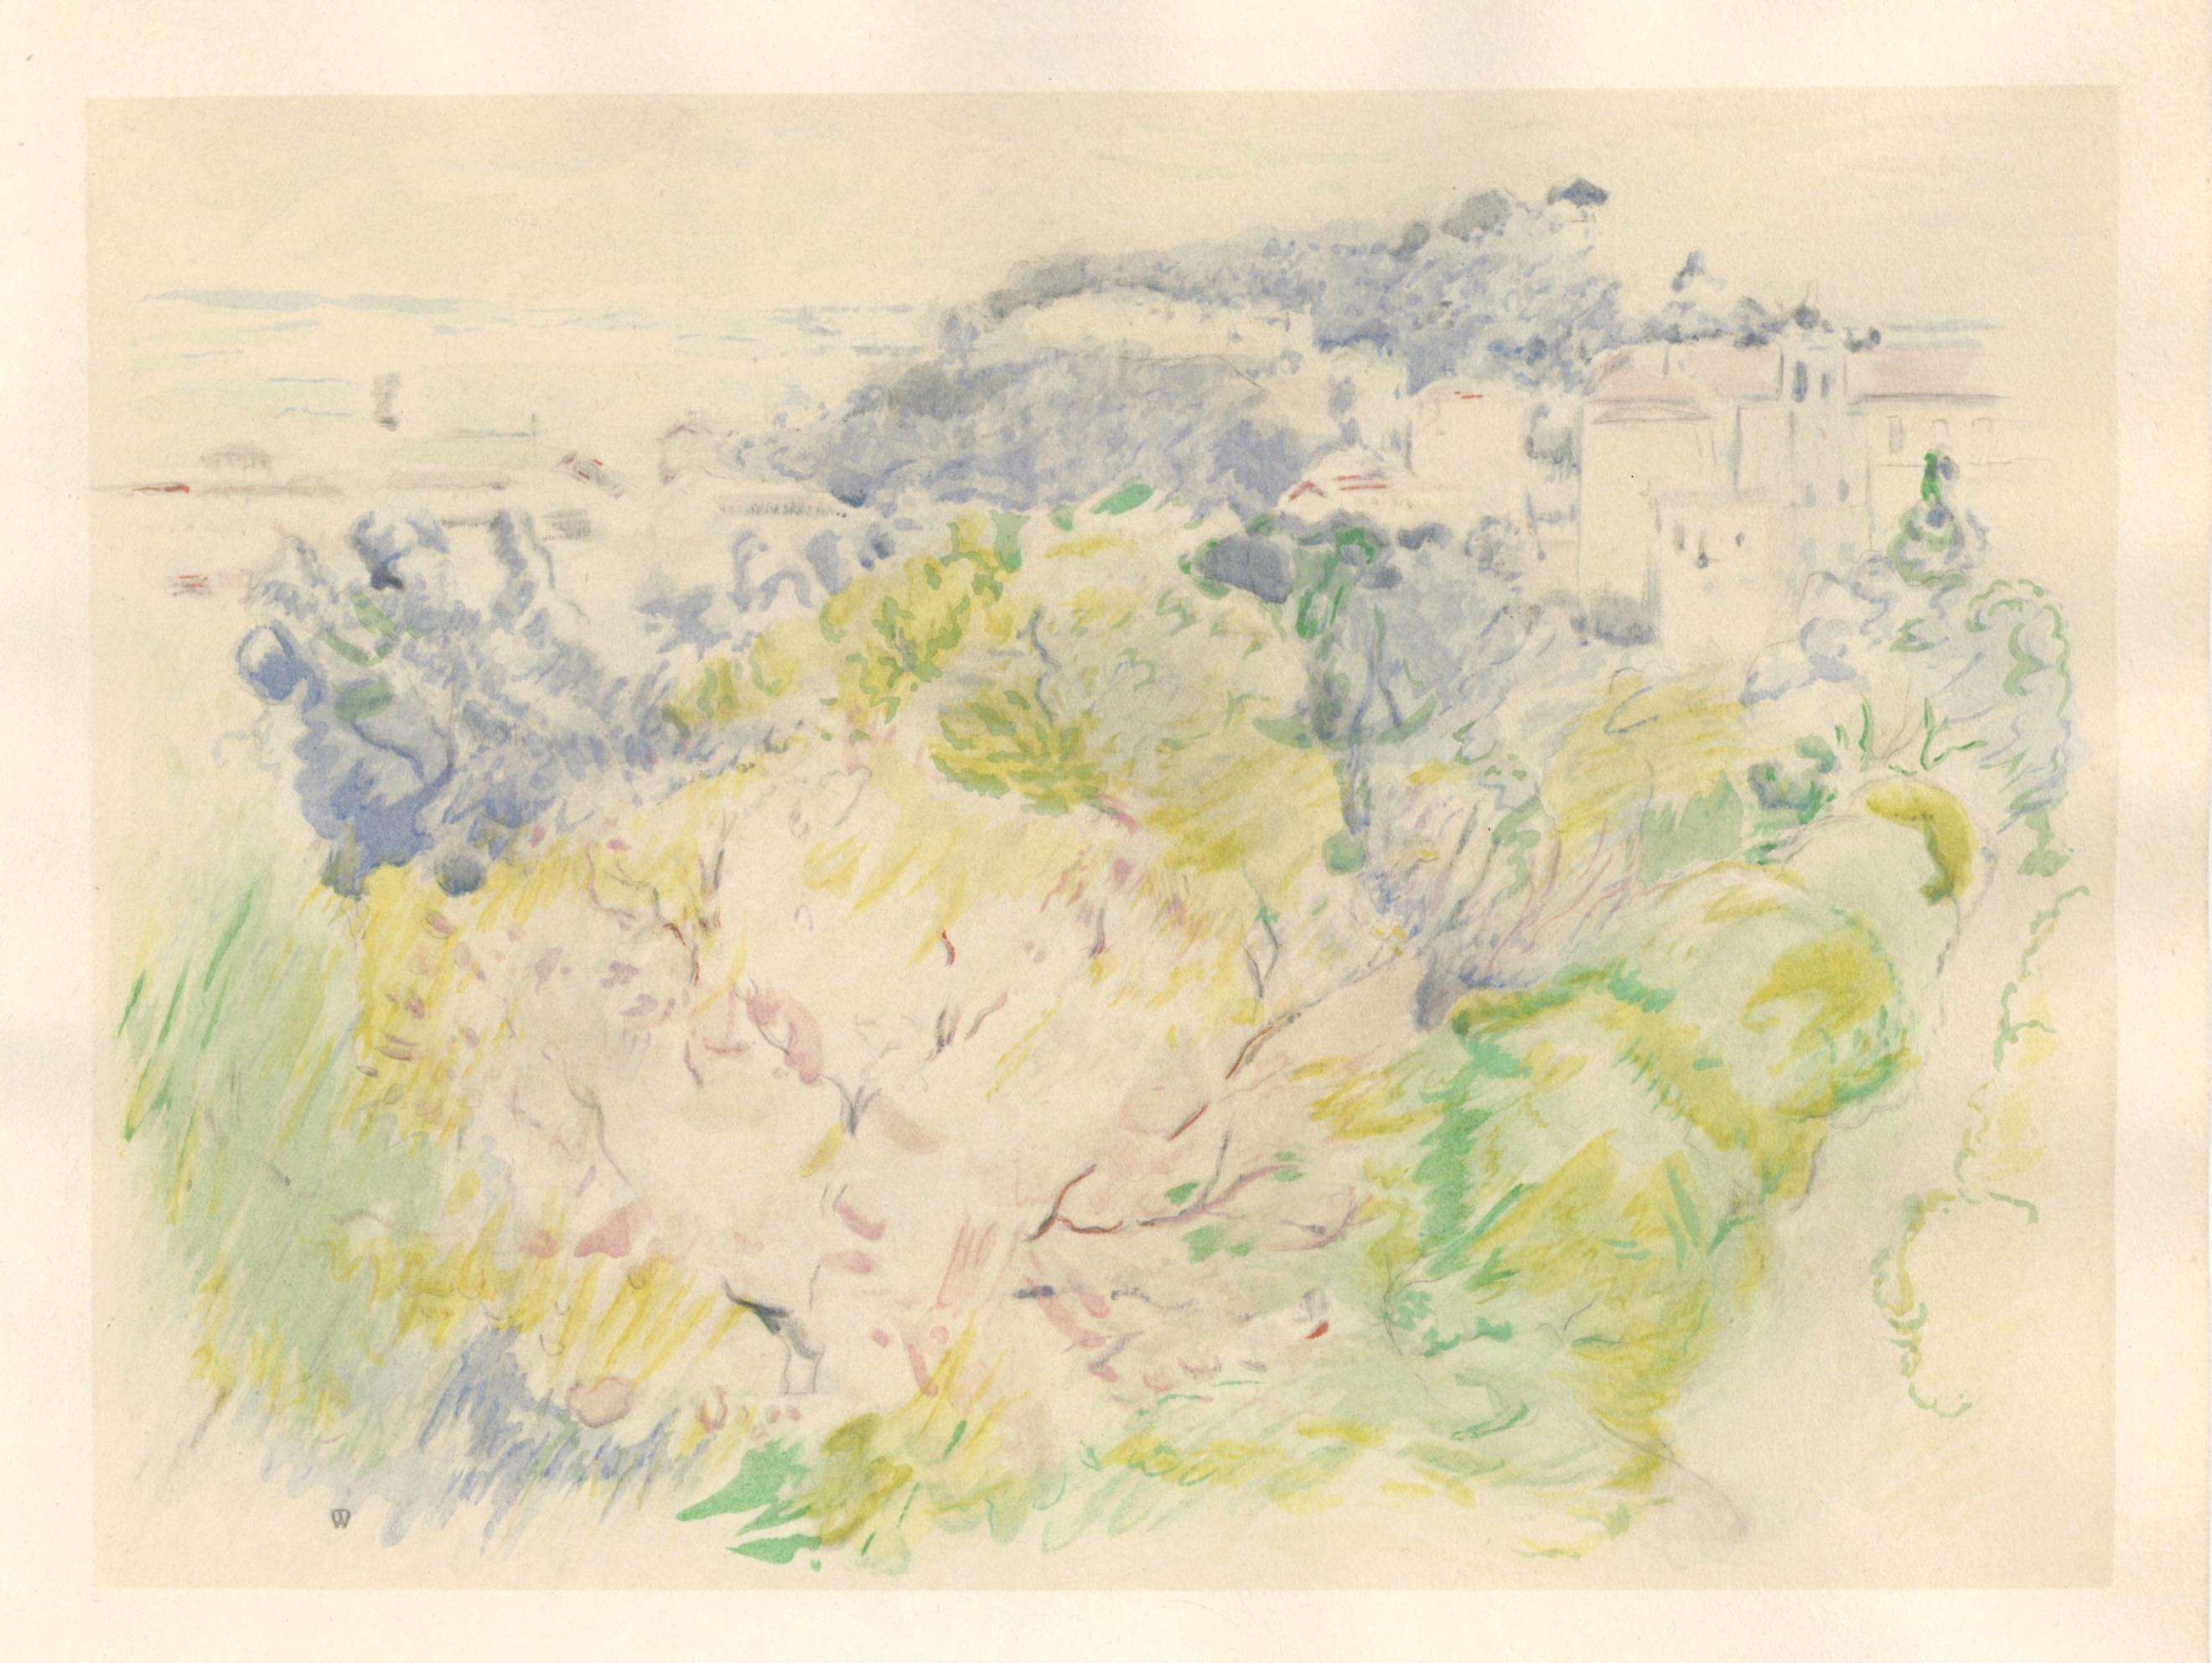 Medium: pochoir (after the 1888 watercolor). Printed 1946 in a limited edition of 300 for the rare "Berthe Morisot Seize Aquarelles" portfolio, published in Paris by Quatre Chemins. The image measures 7 1/2 x 10 inches (190 x 255 mm). The total